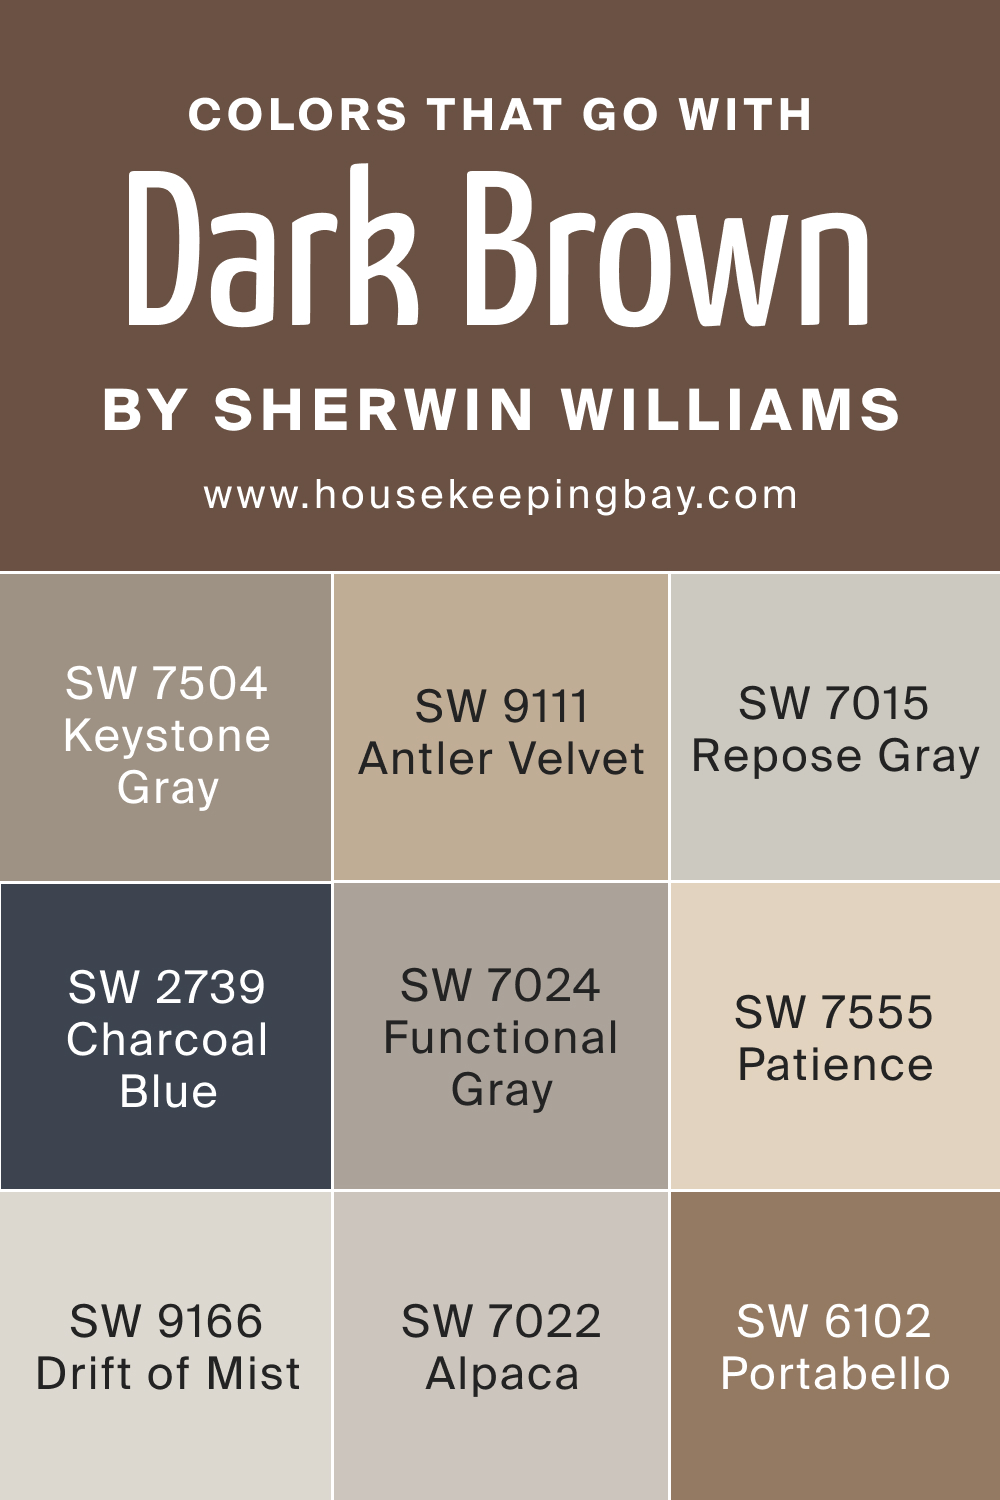 Colors that goes with SW 7520 Dark Brown by Sherwin Williams